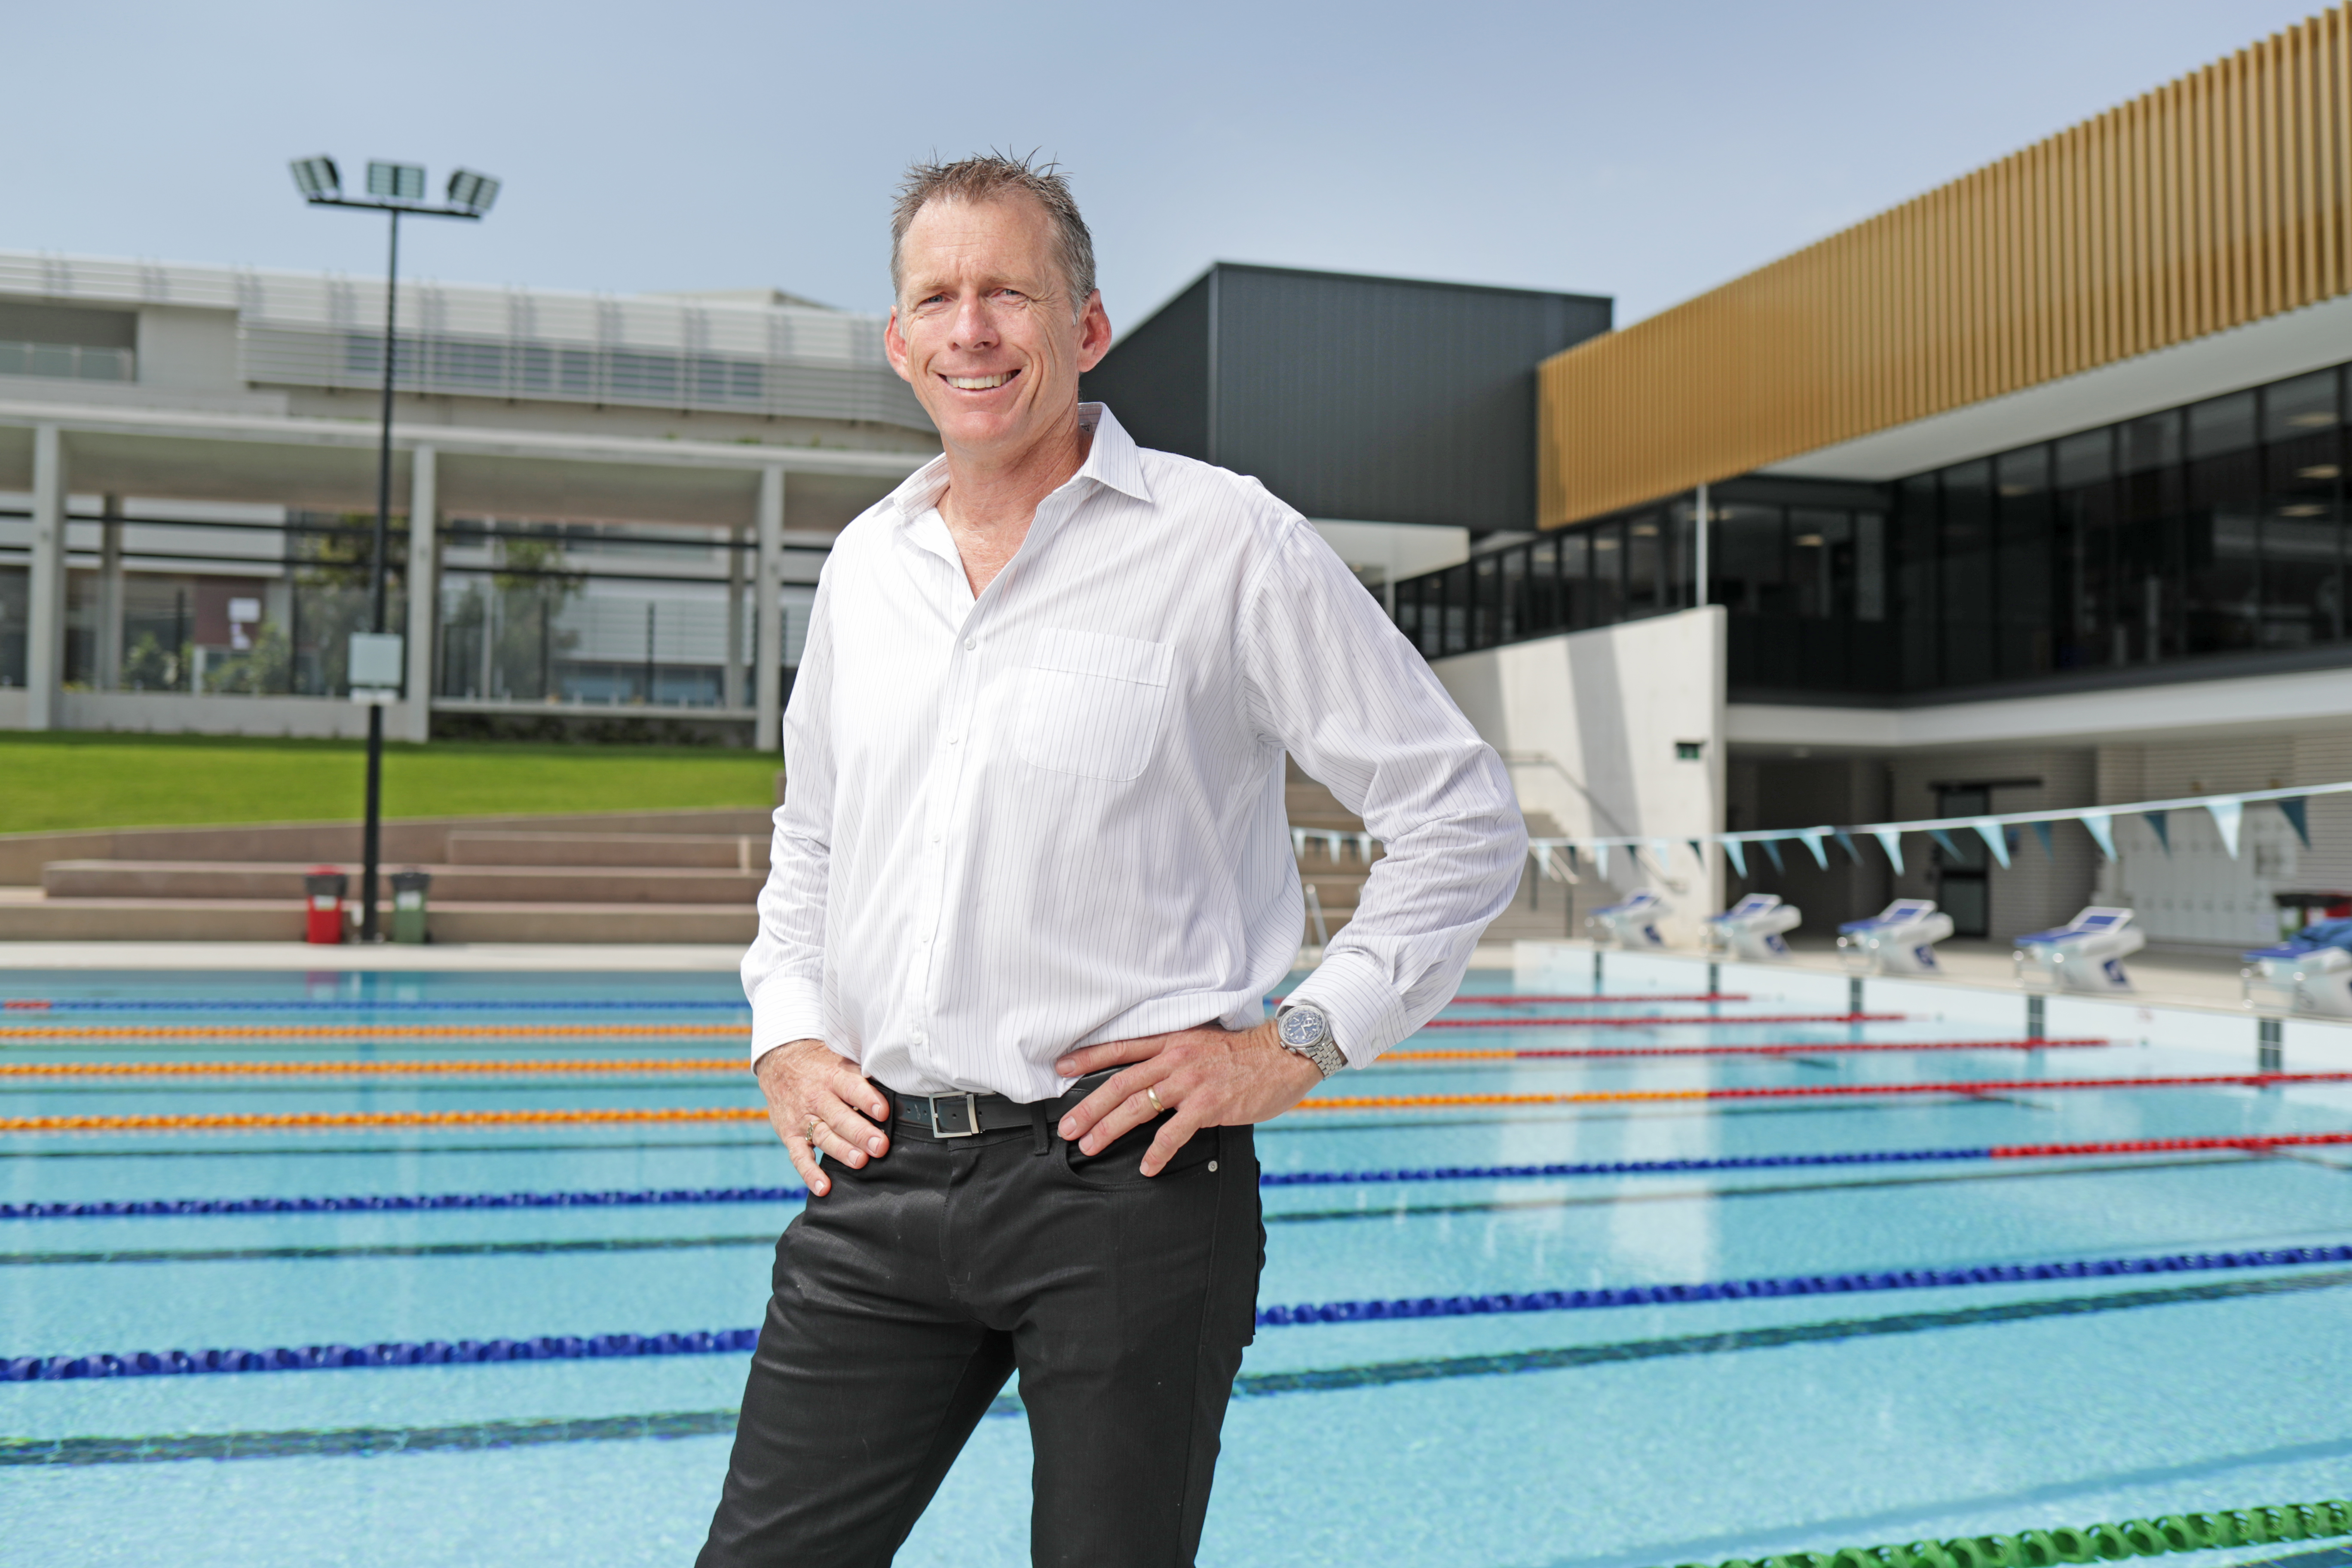 Duncan Free OAM, Director, Griffith Sports College, was among Griffith University experts to share GC2018 insights with the Gold Coast community through Inside Scoop.